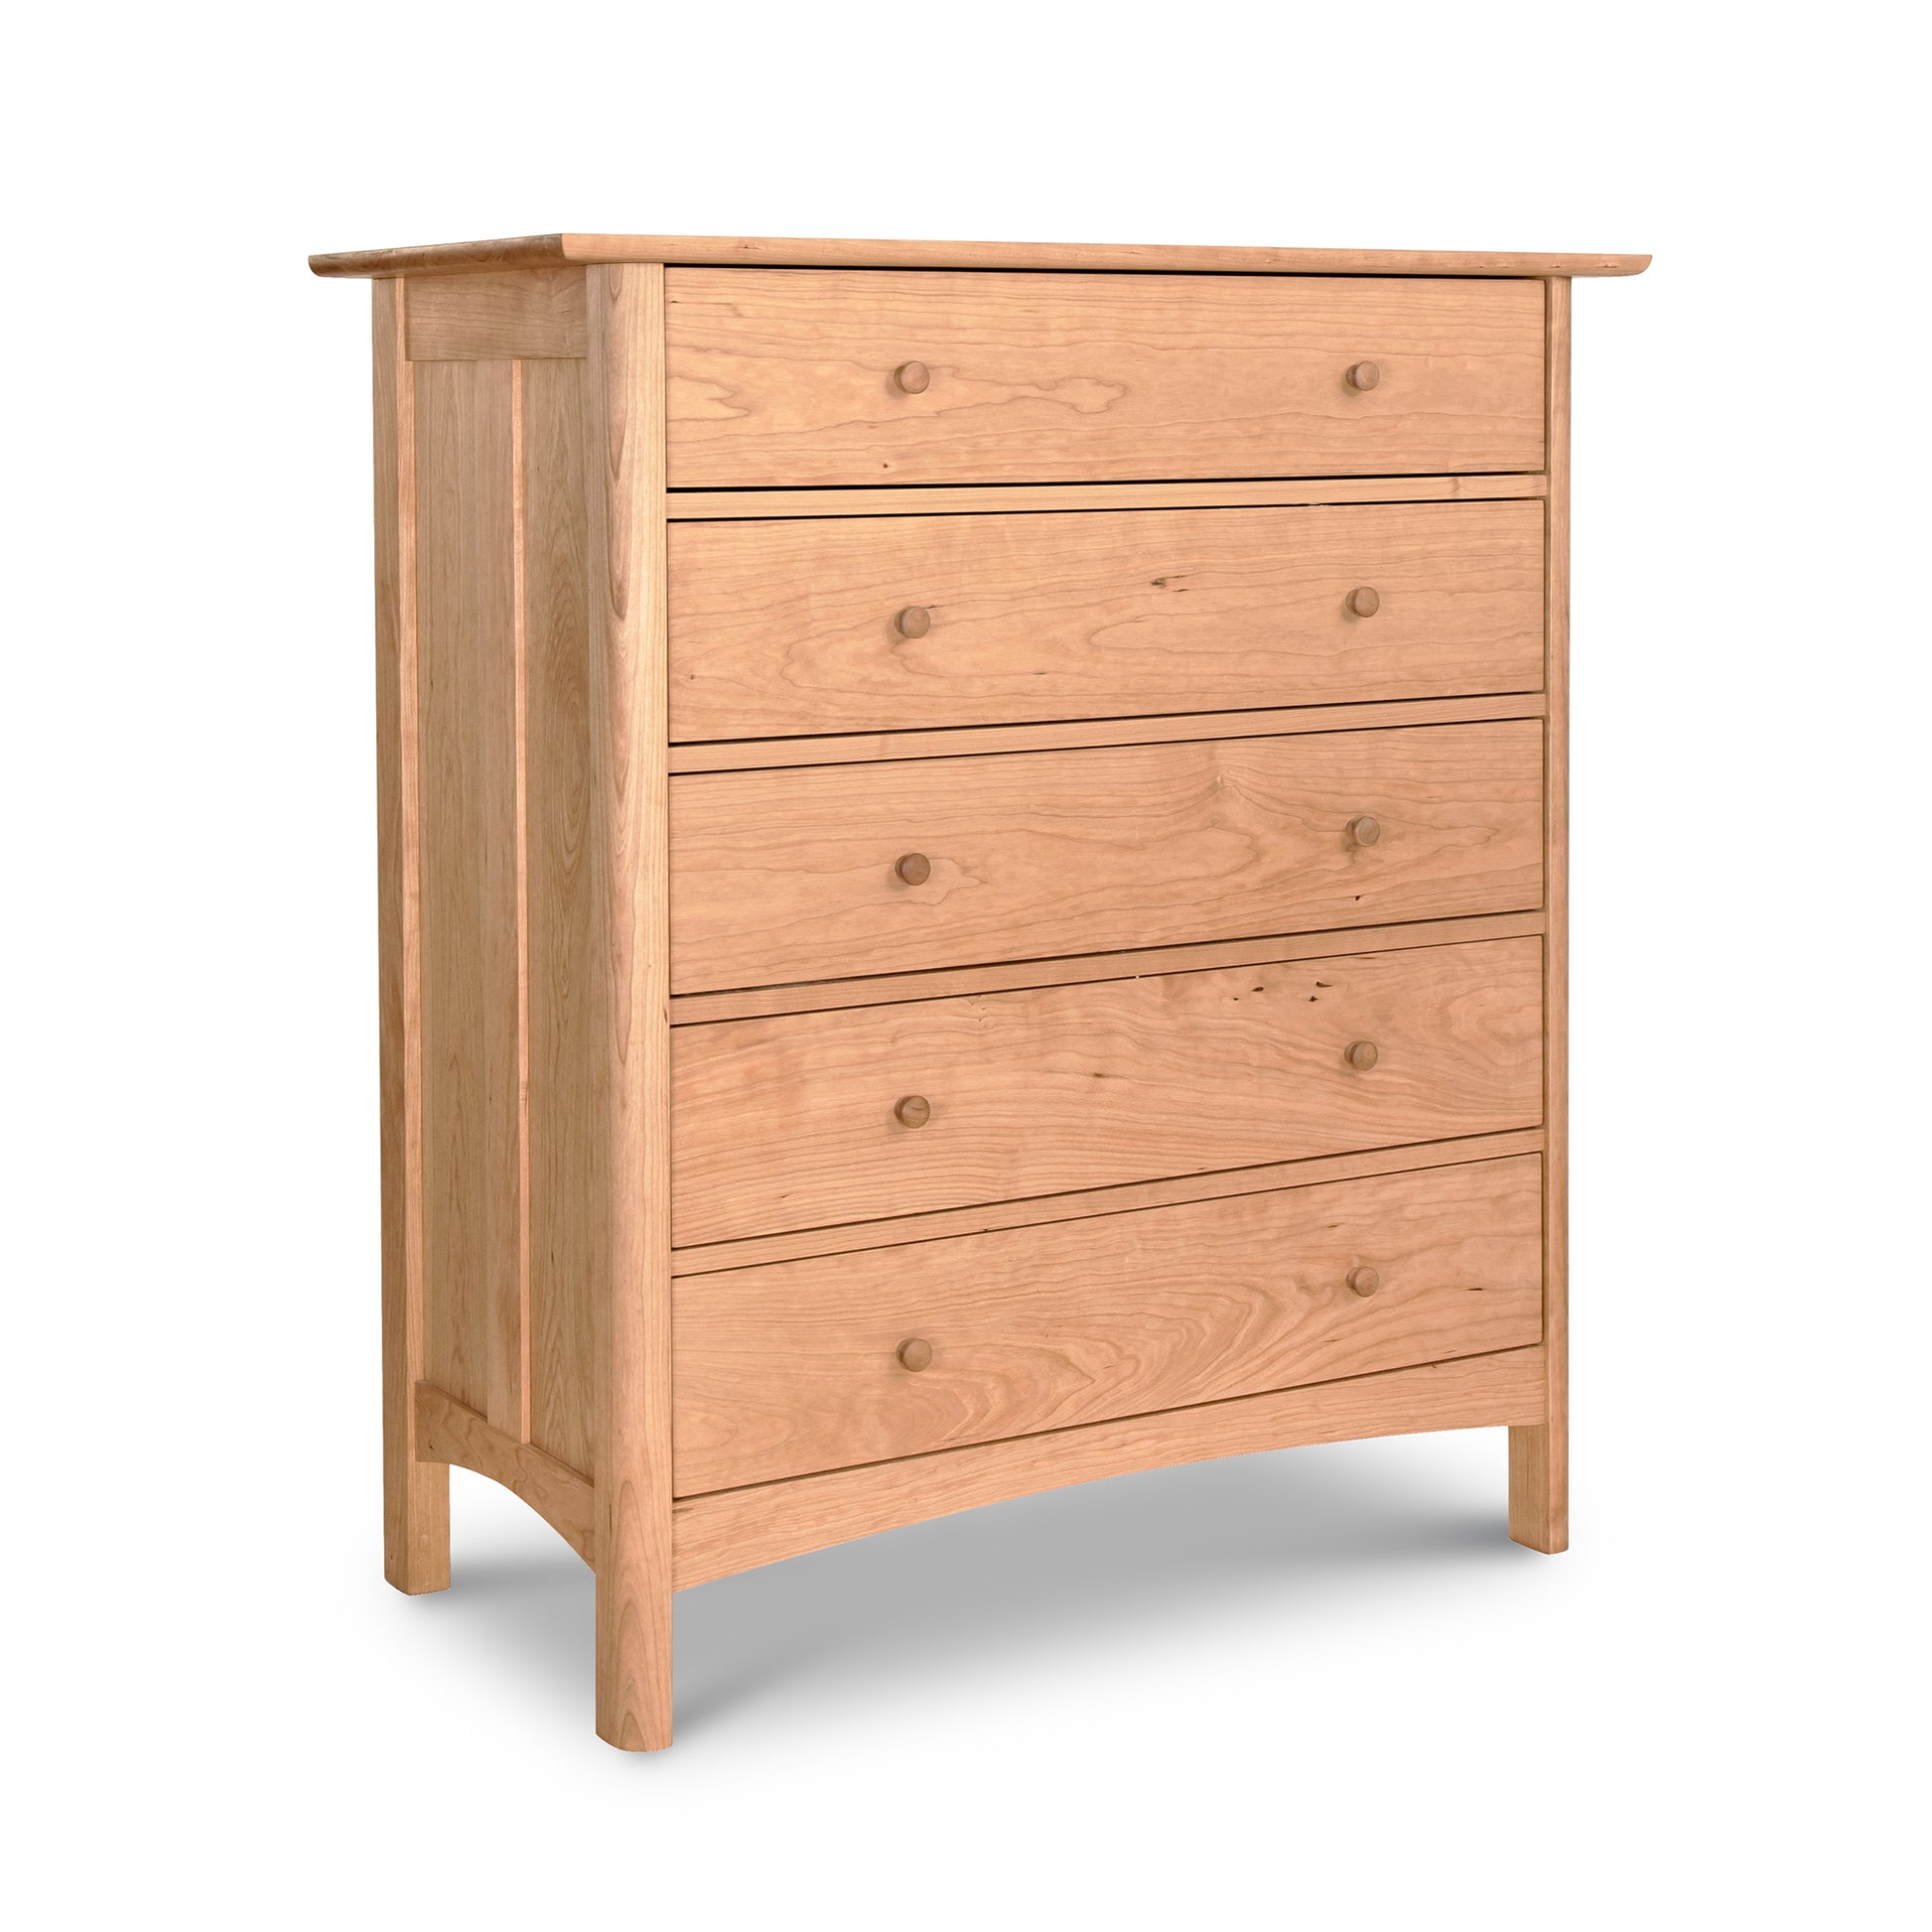 A Vermont Furniture Designs Heartwood Shaker 5-Drawer Chest of drawers on a white background.